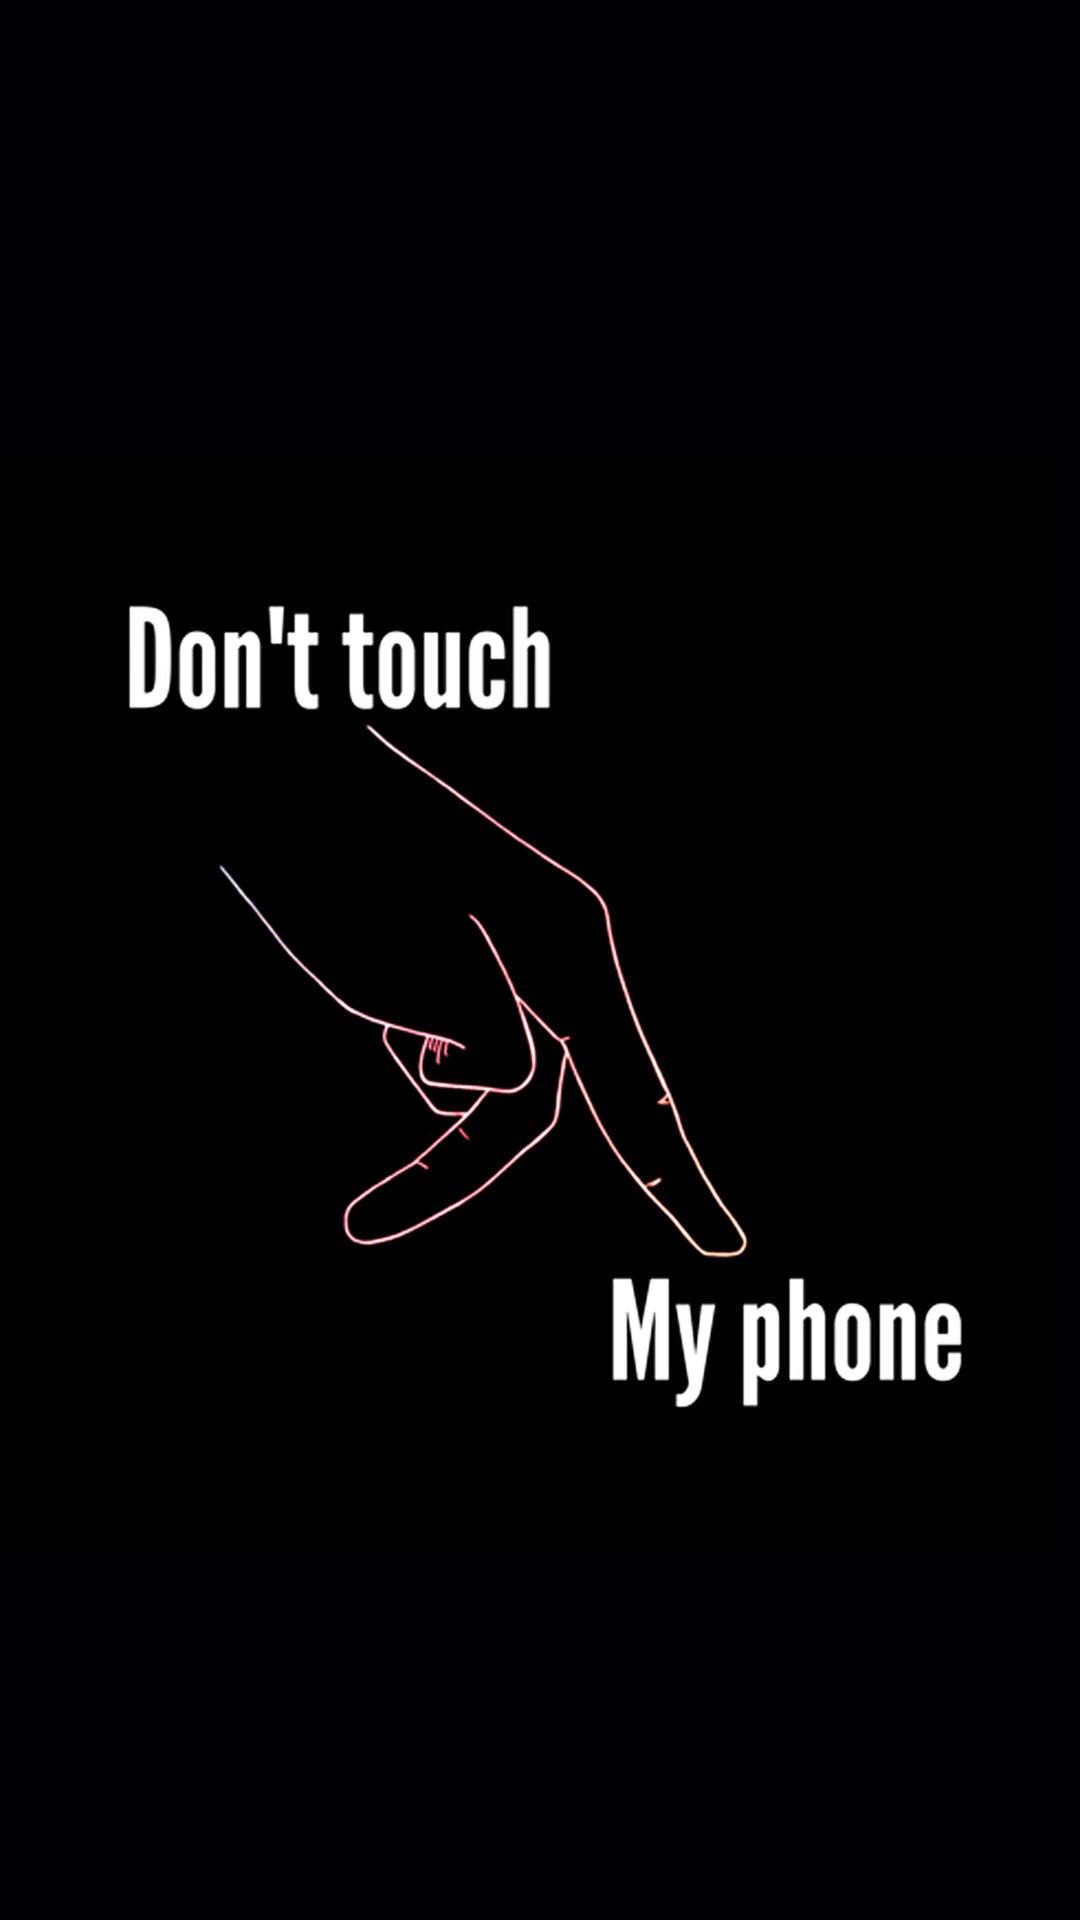 don t touch my phone wallpaper hd,black,font,text,logo,graphics